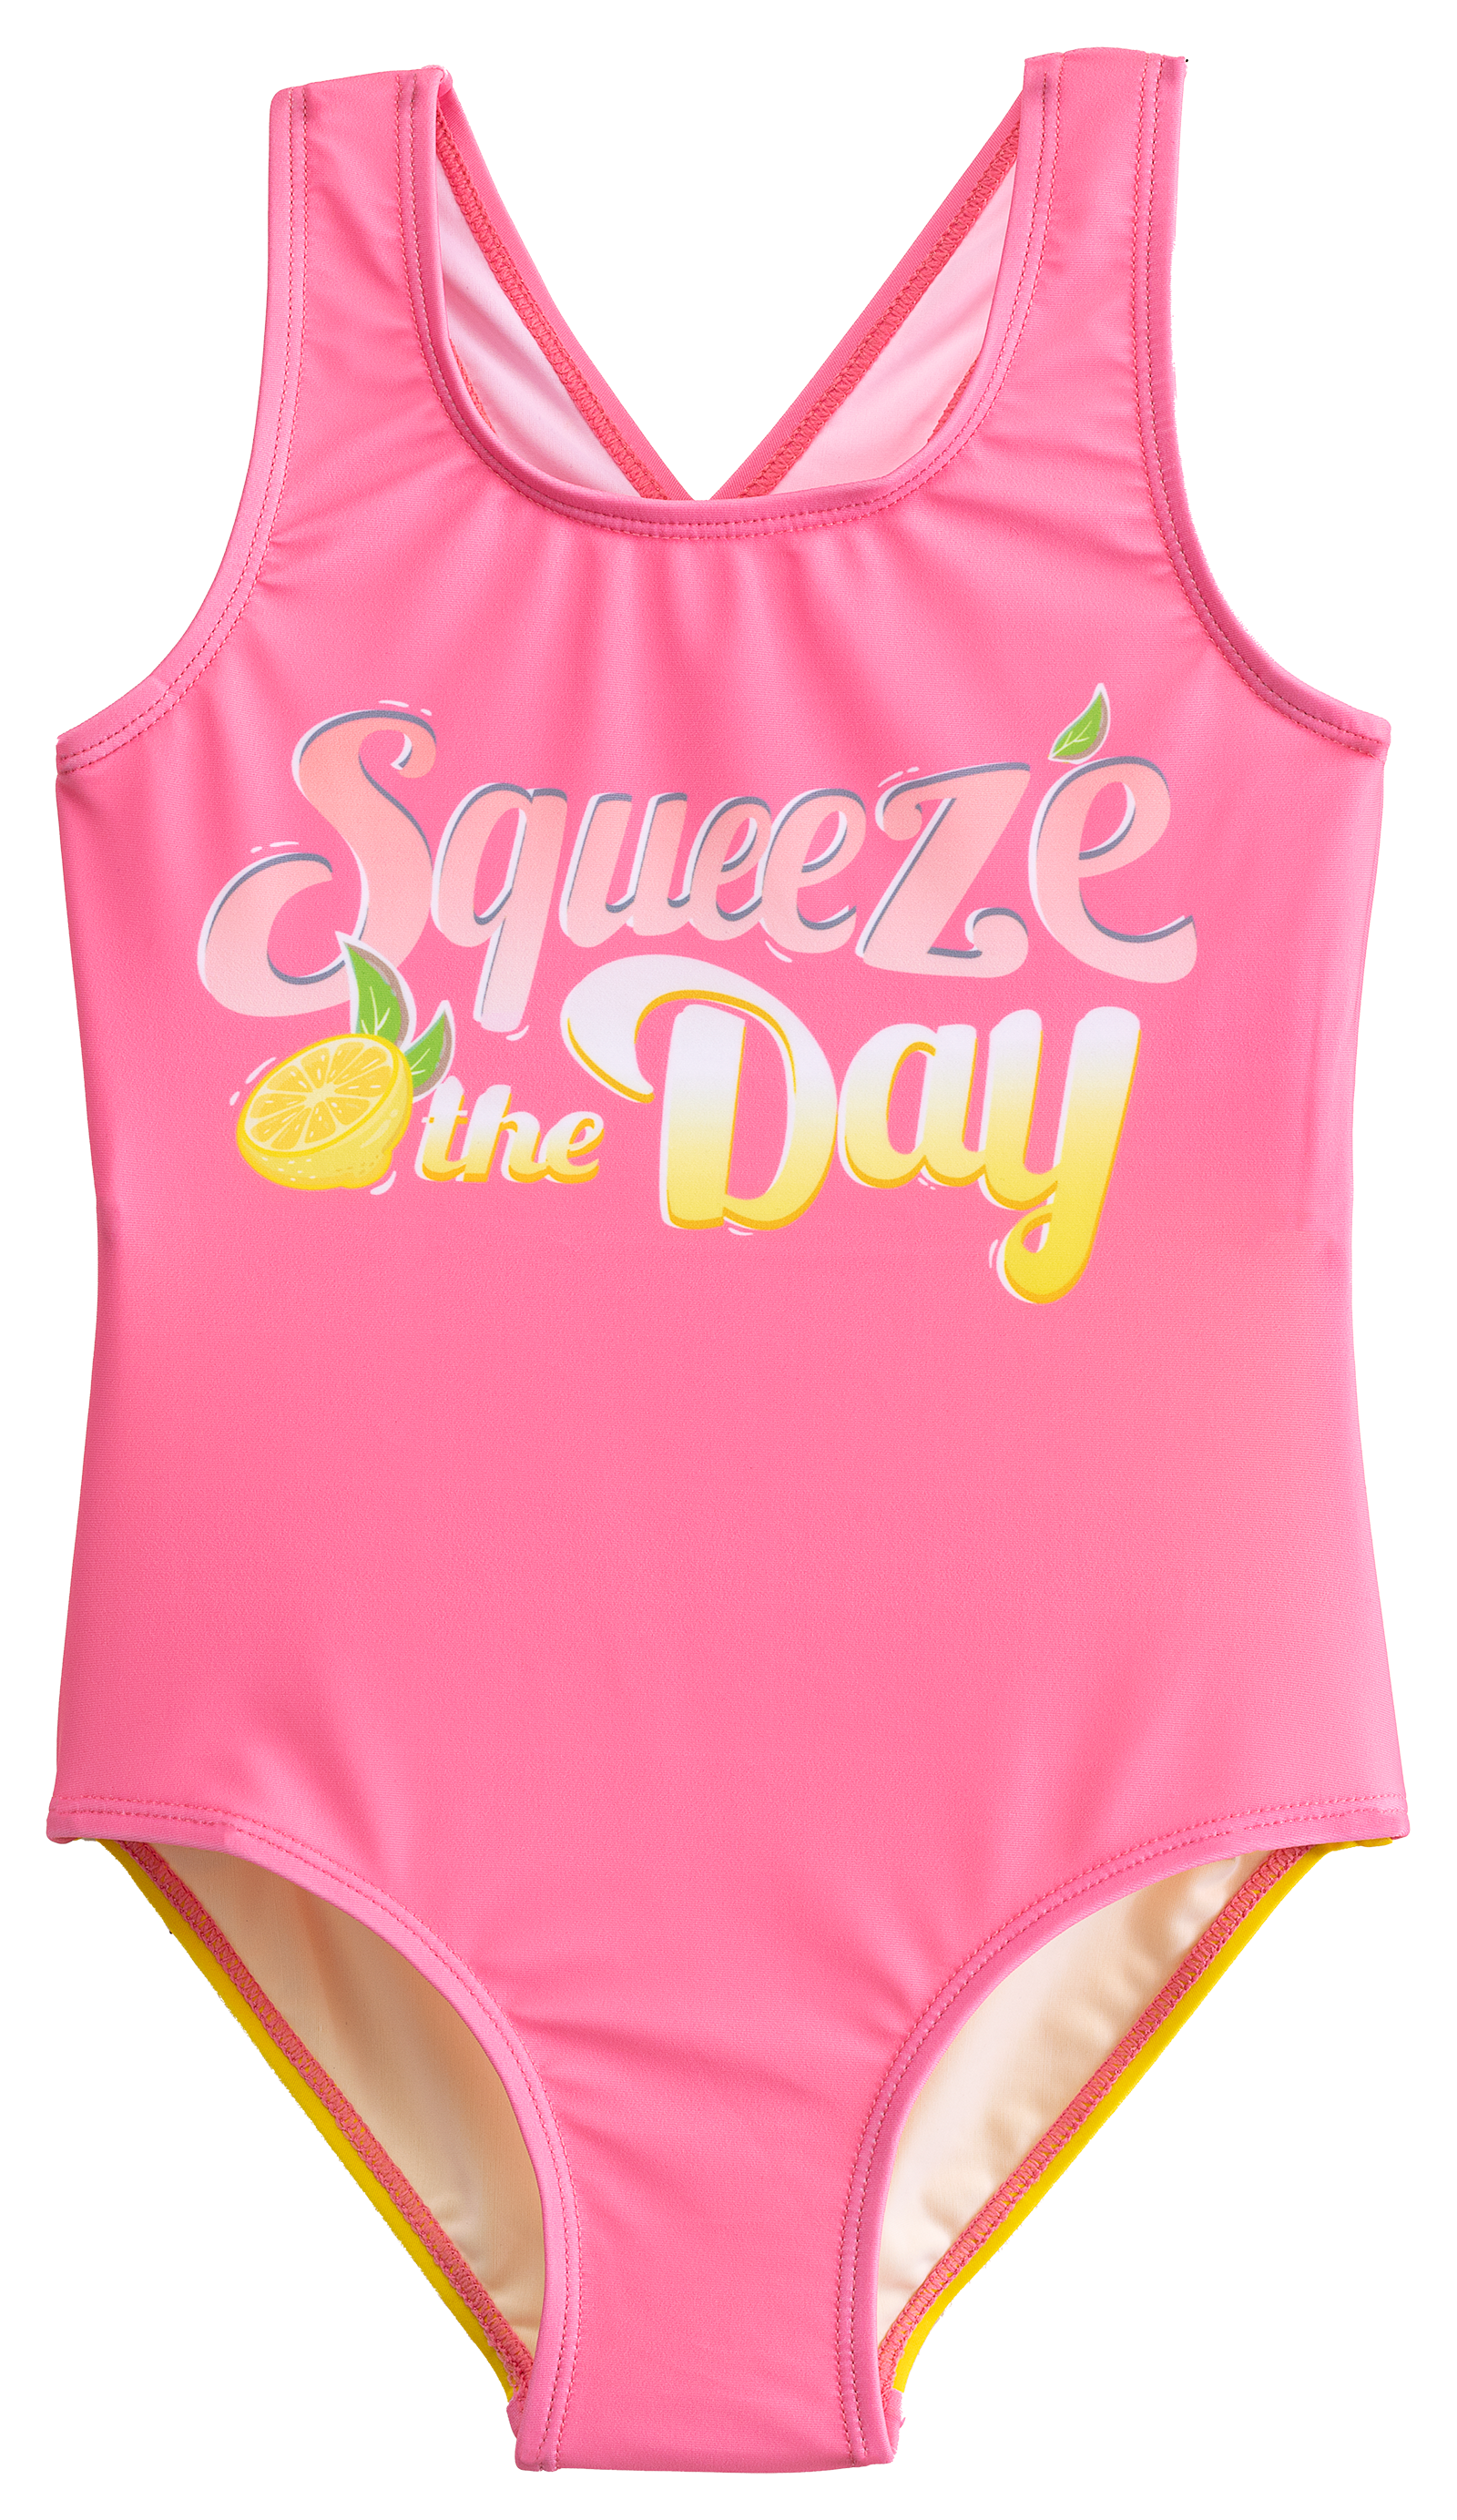 Banana Boat Squeeze the Day 1-Piece Swimsuit for Girls - Coral - 4